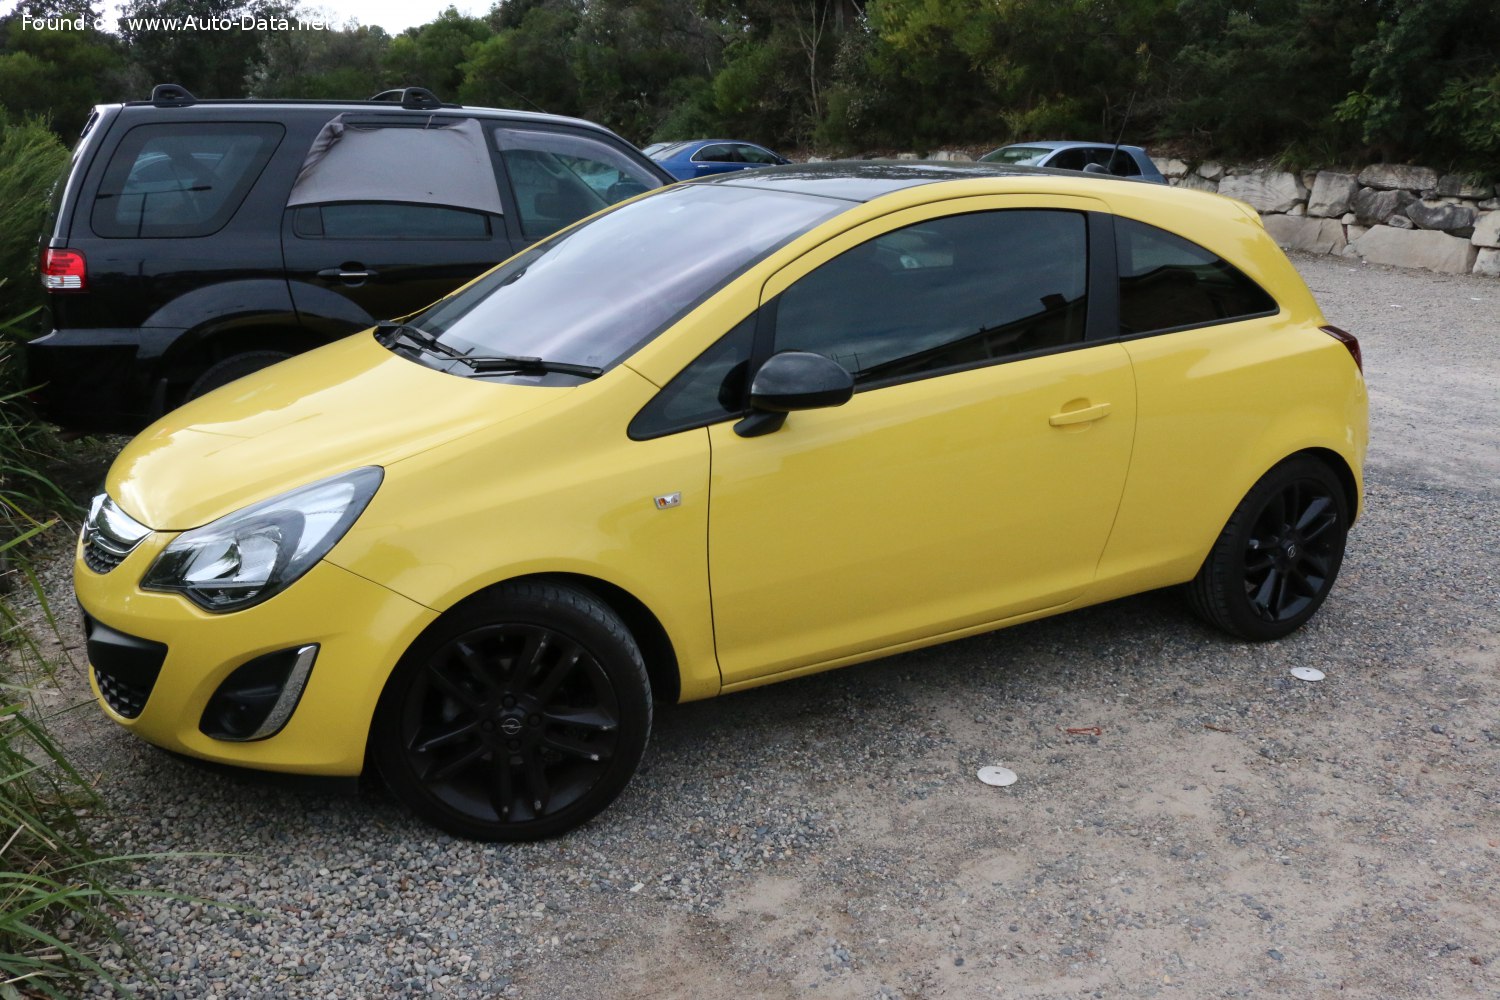 VIN Decoder and Lookup for OPEL CORSA 1.2